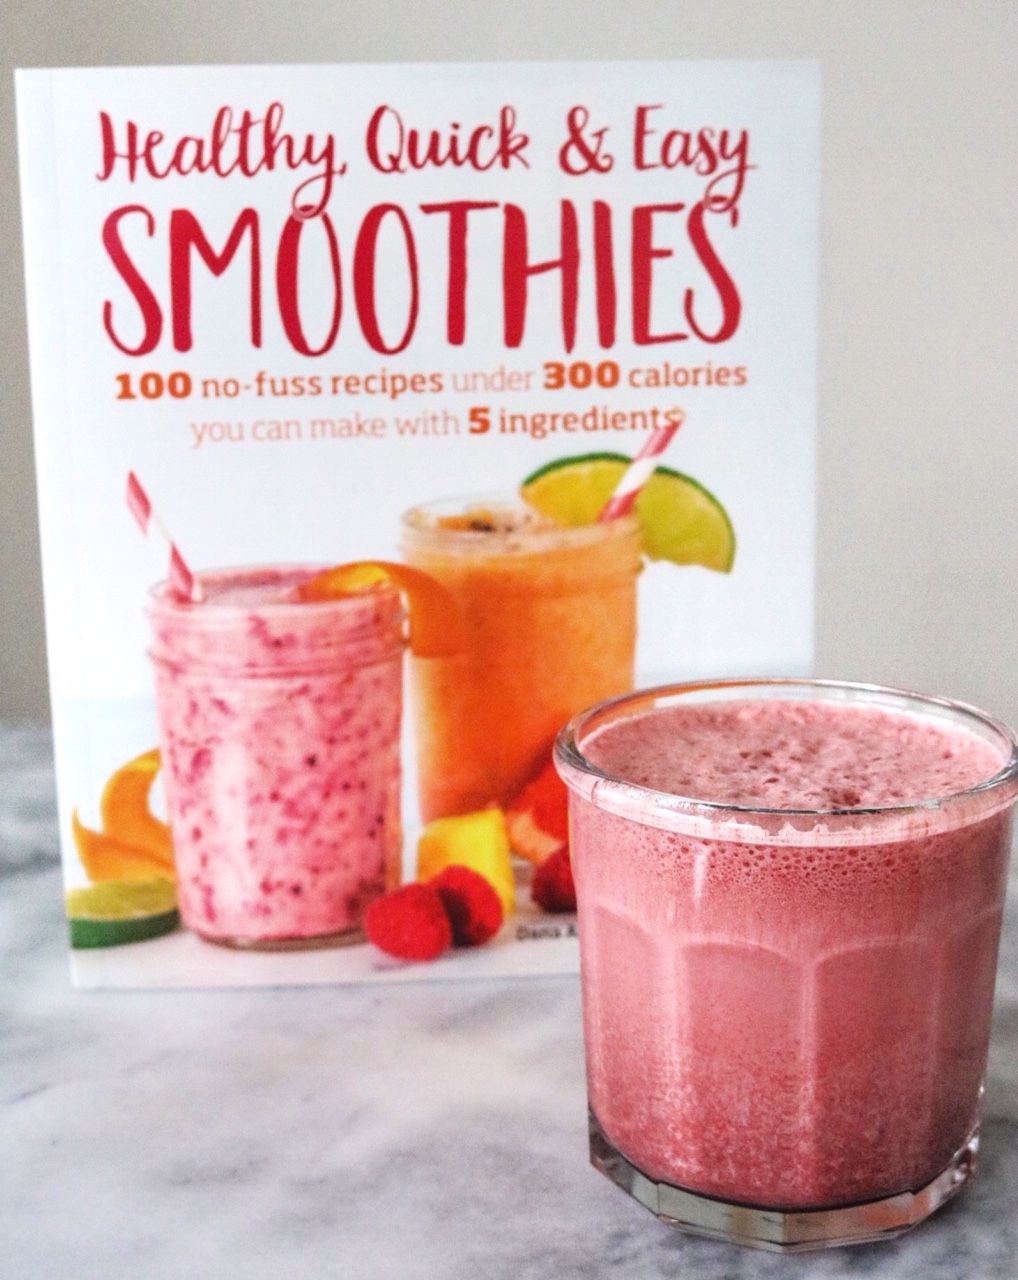 Healthy, Quick &  Easy Smoothies Cookbook Review